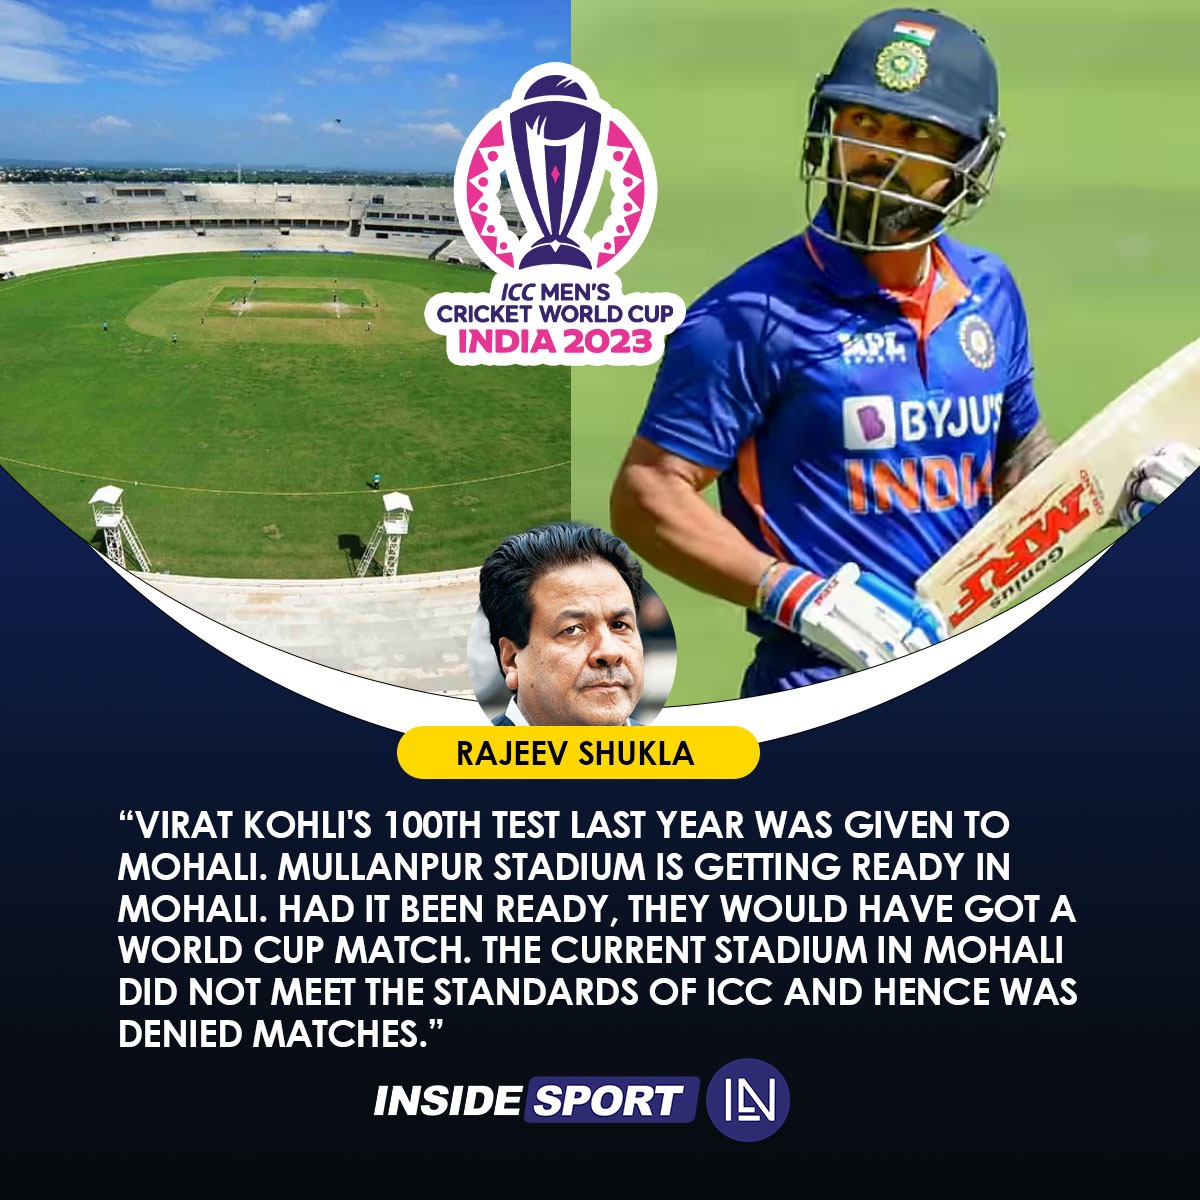 BCCI vice president gives strong reply to ‘political interference’ claims on selection of World Cup 2023 venues 👀

#BCCI #Mohali #RajeevShukla #India #ODIWorldCup2023 #CricketTwitter